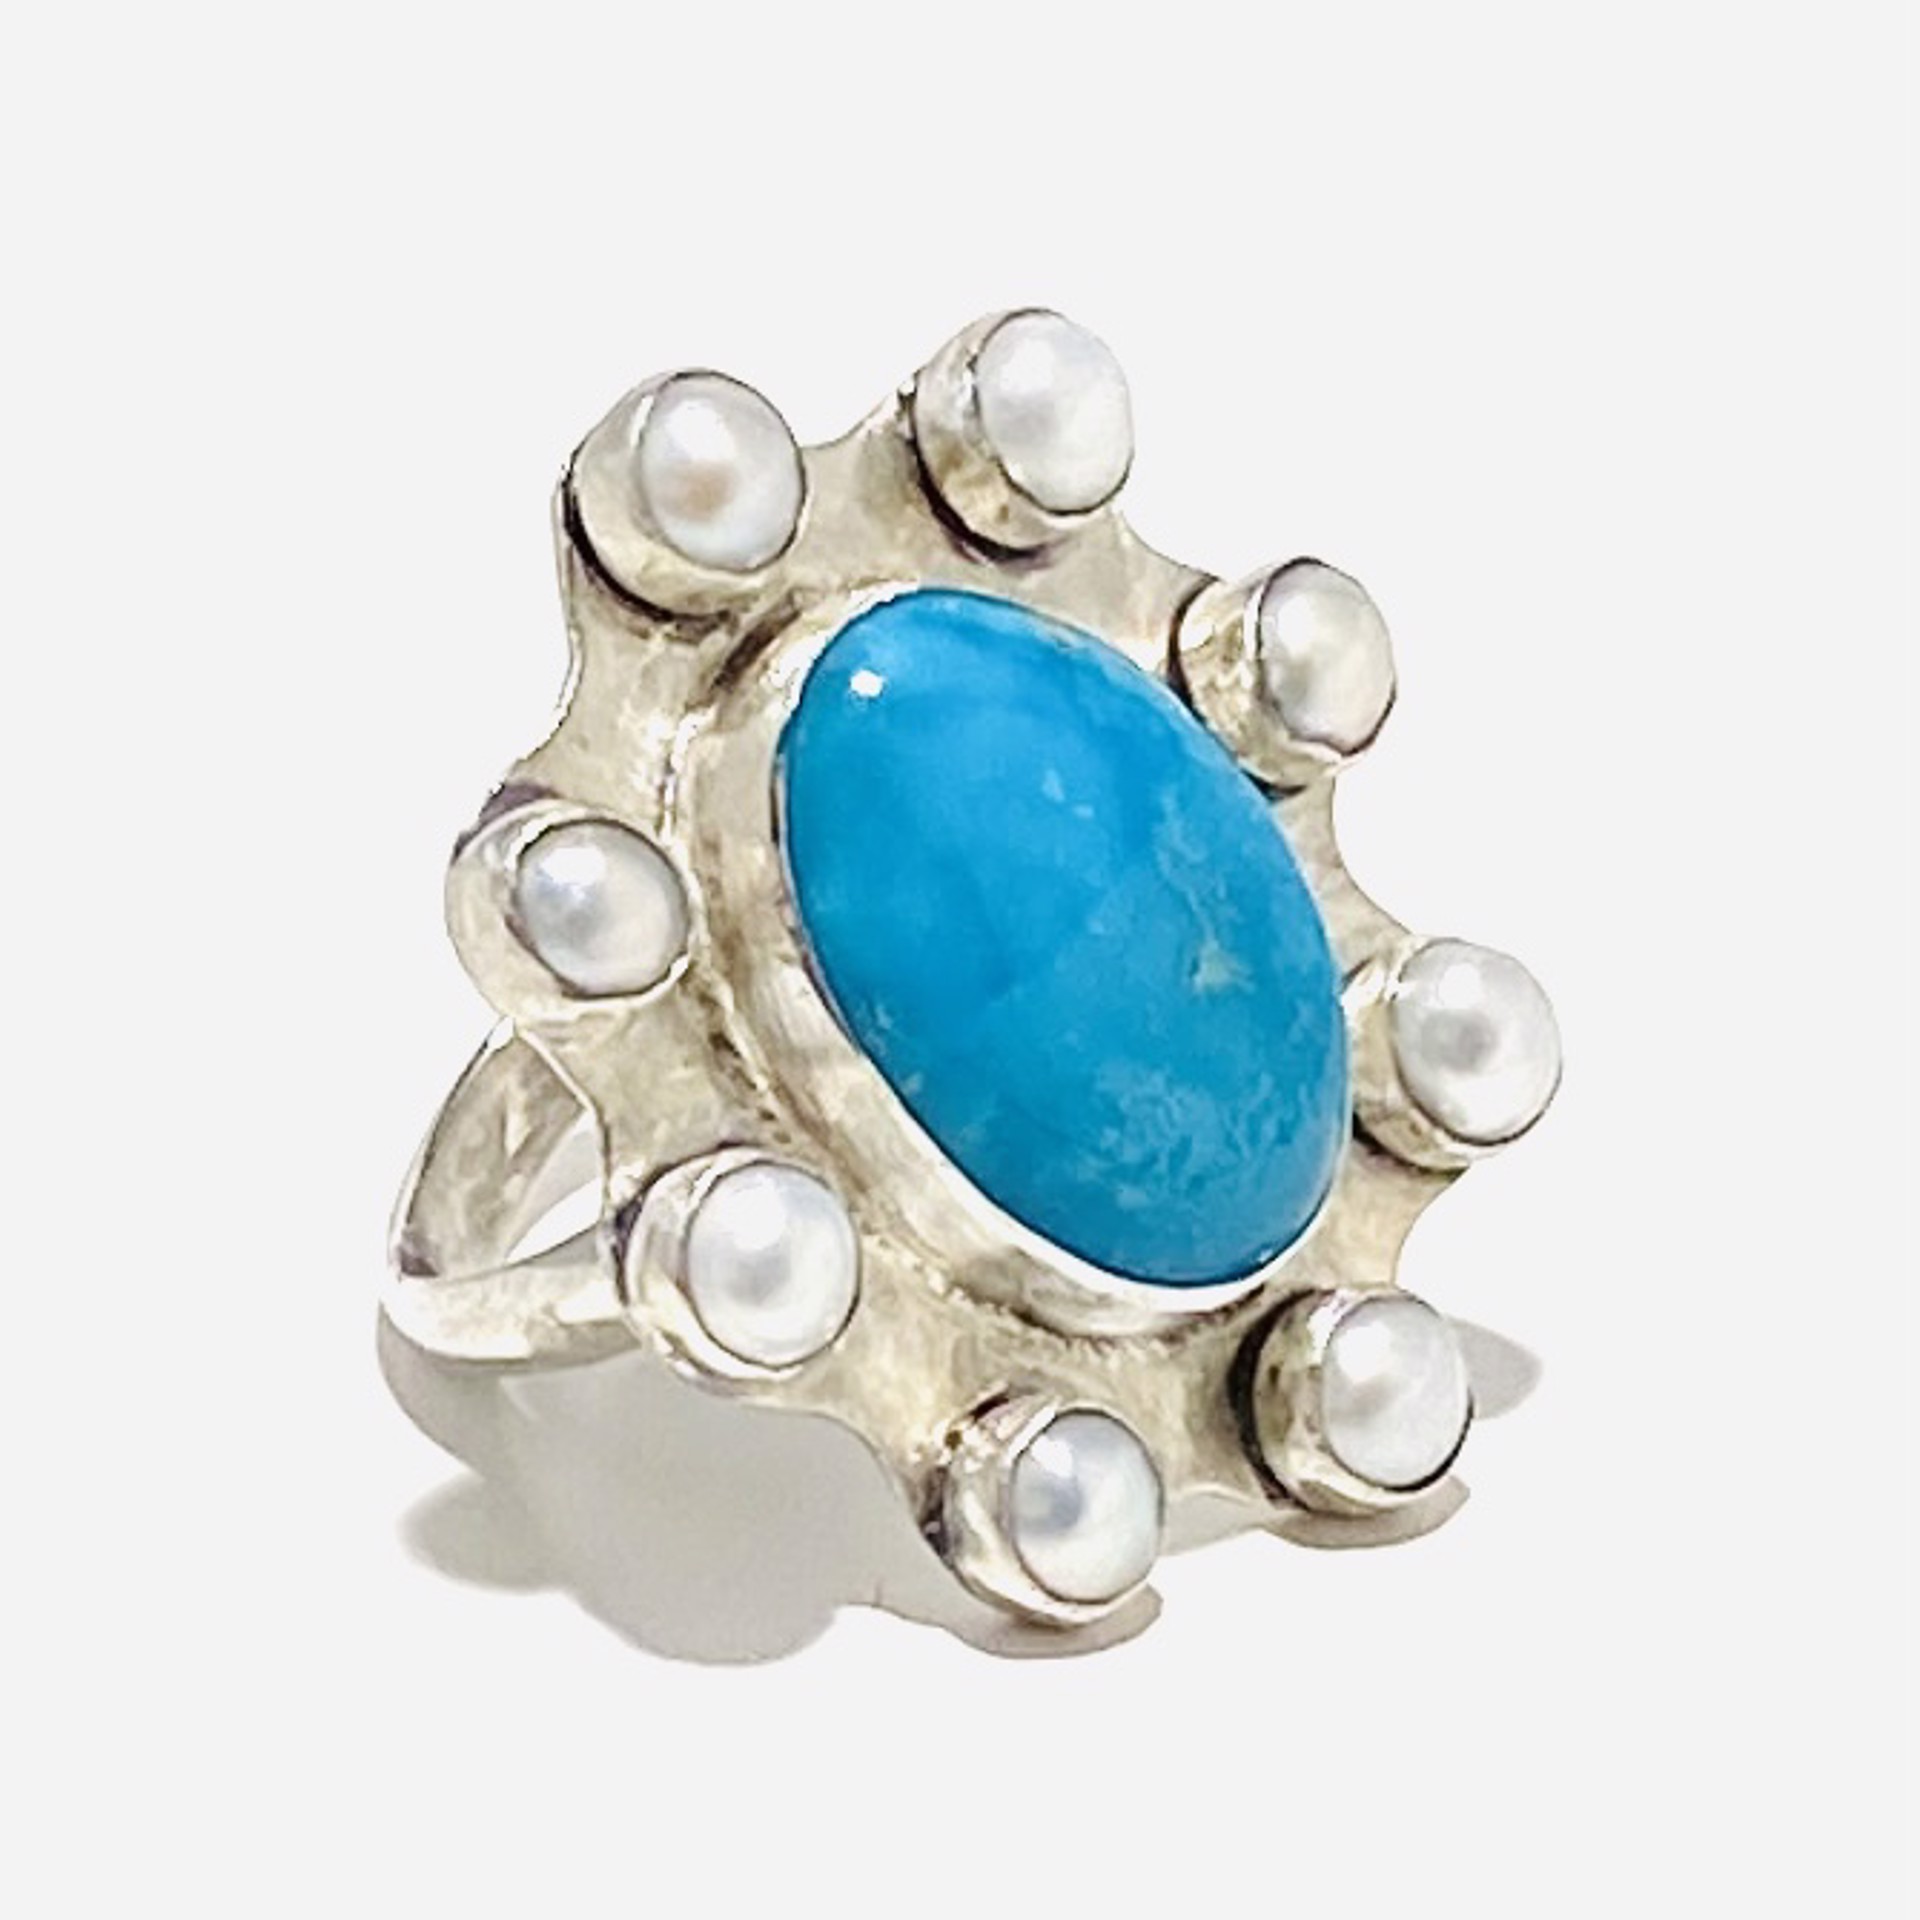 Oval Alpine Village Turquoise Cabochon with Eight Pearls Ring sz8 AB23-1 by Anne Bivens